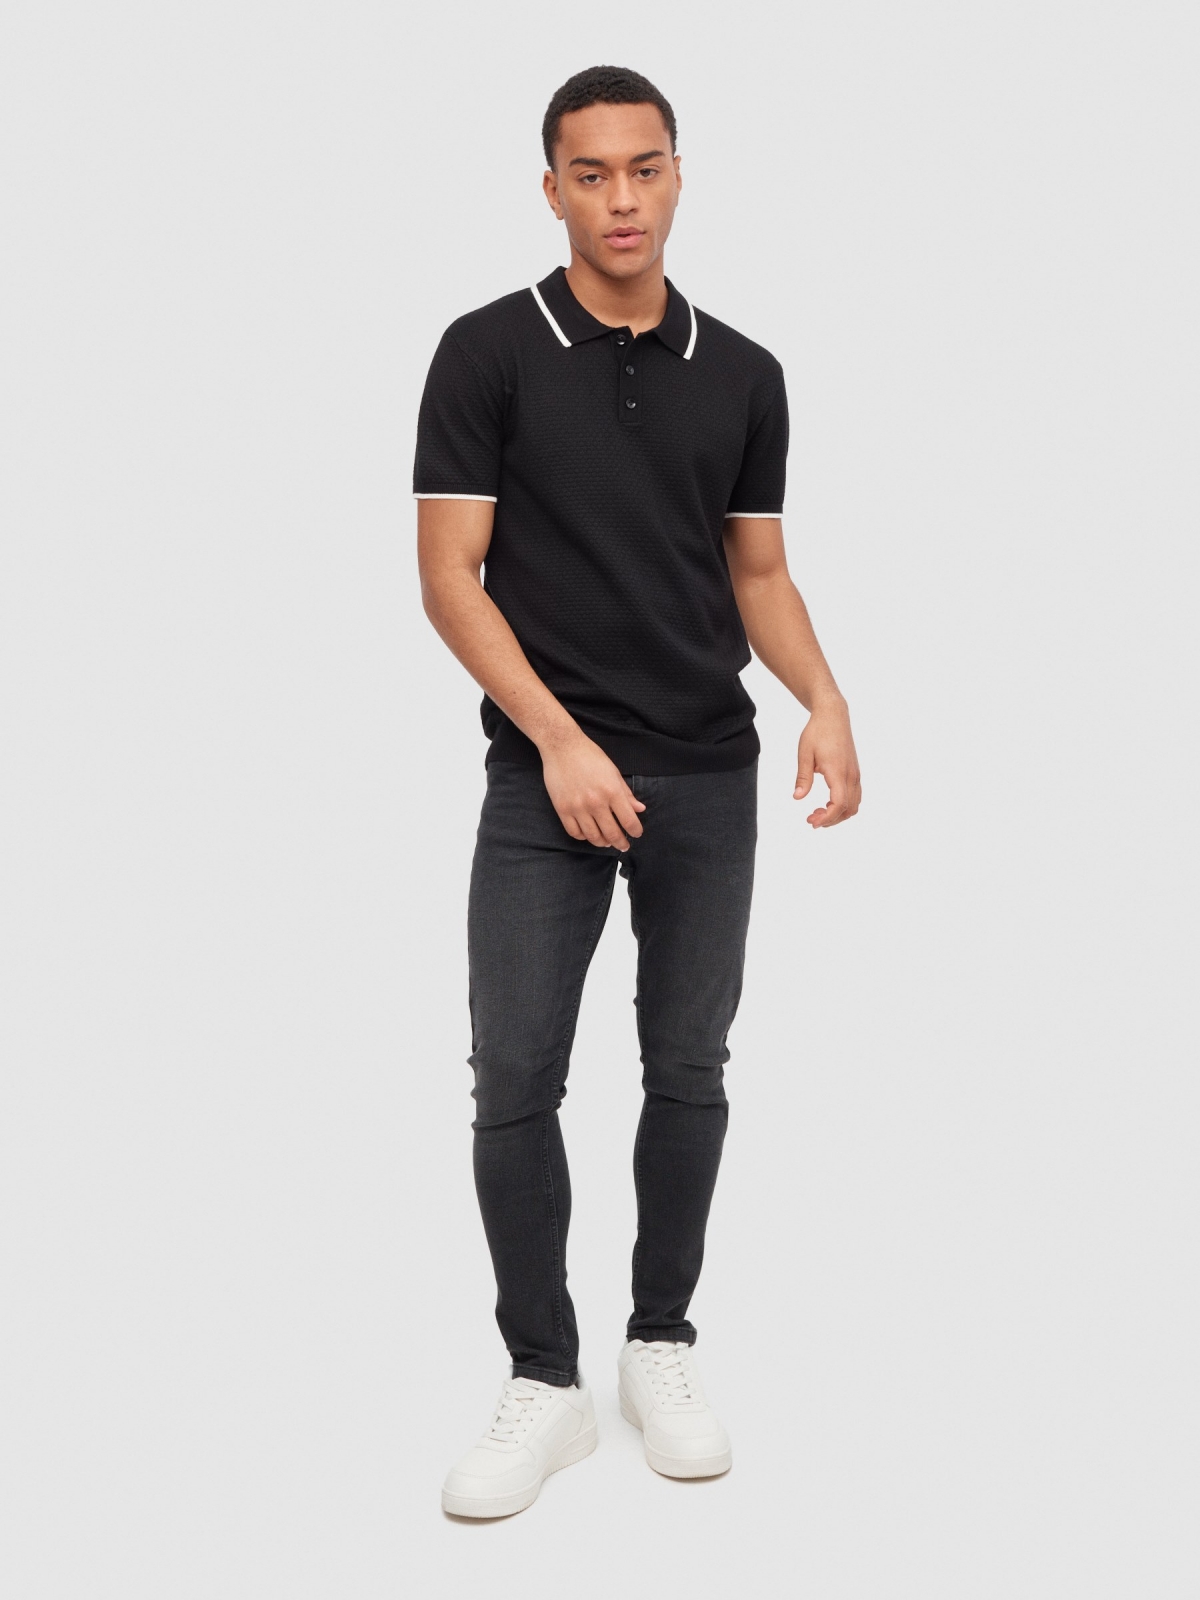 Knitted polo shirt black front view